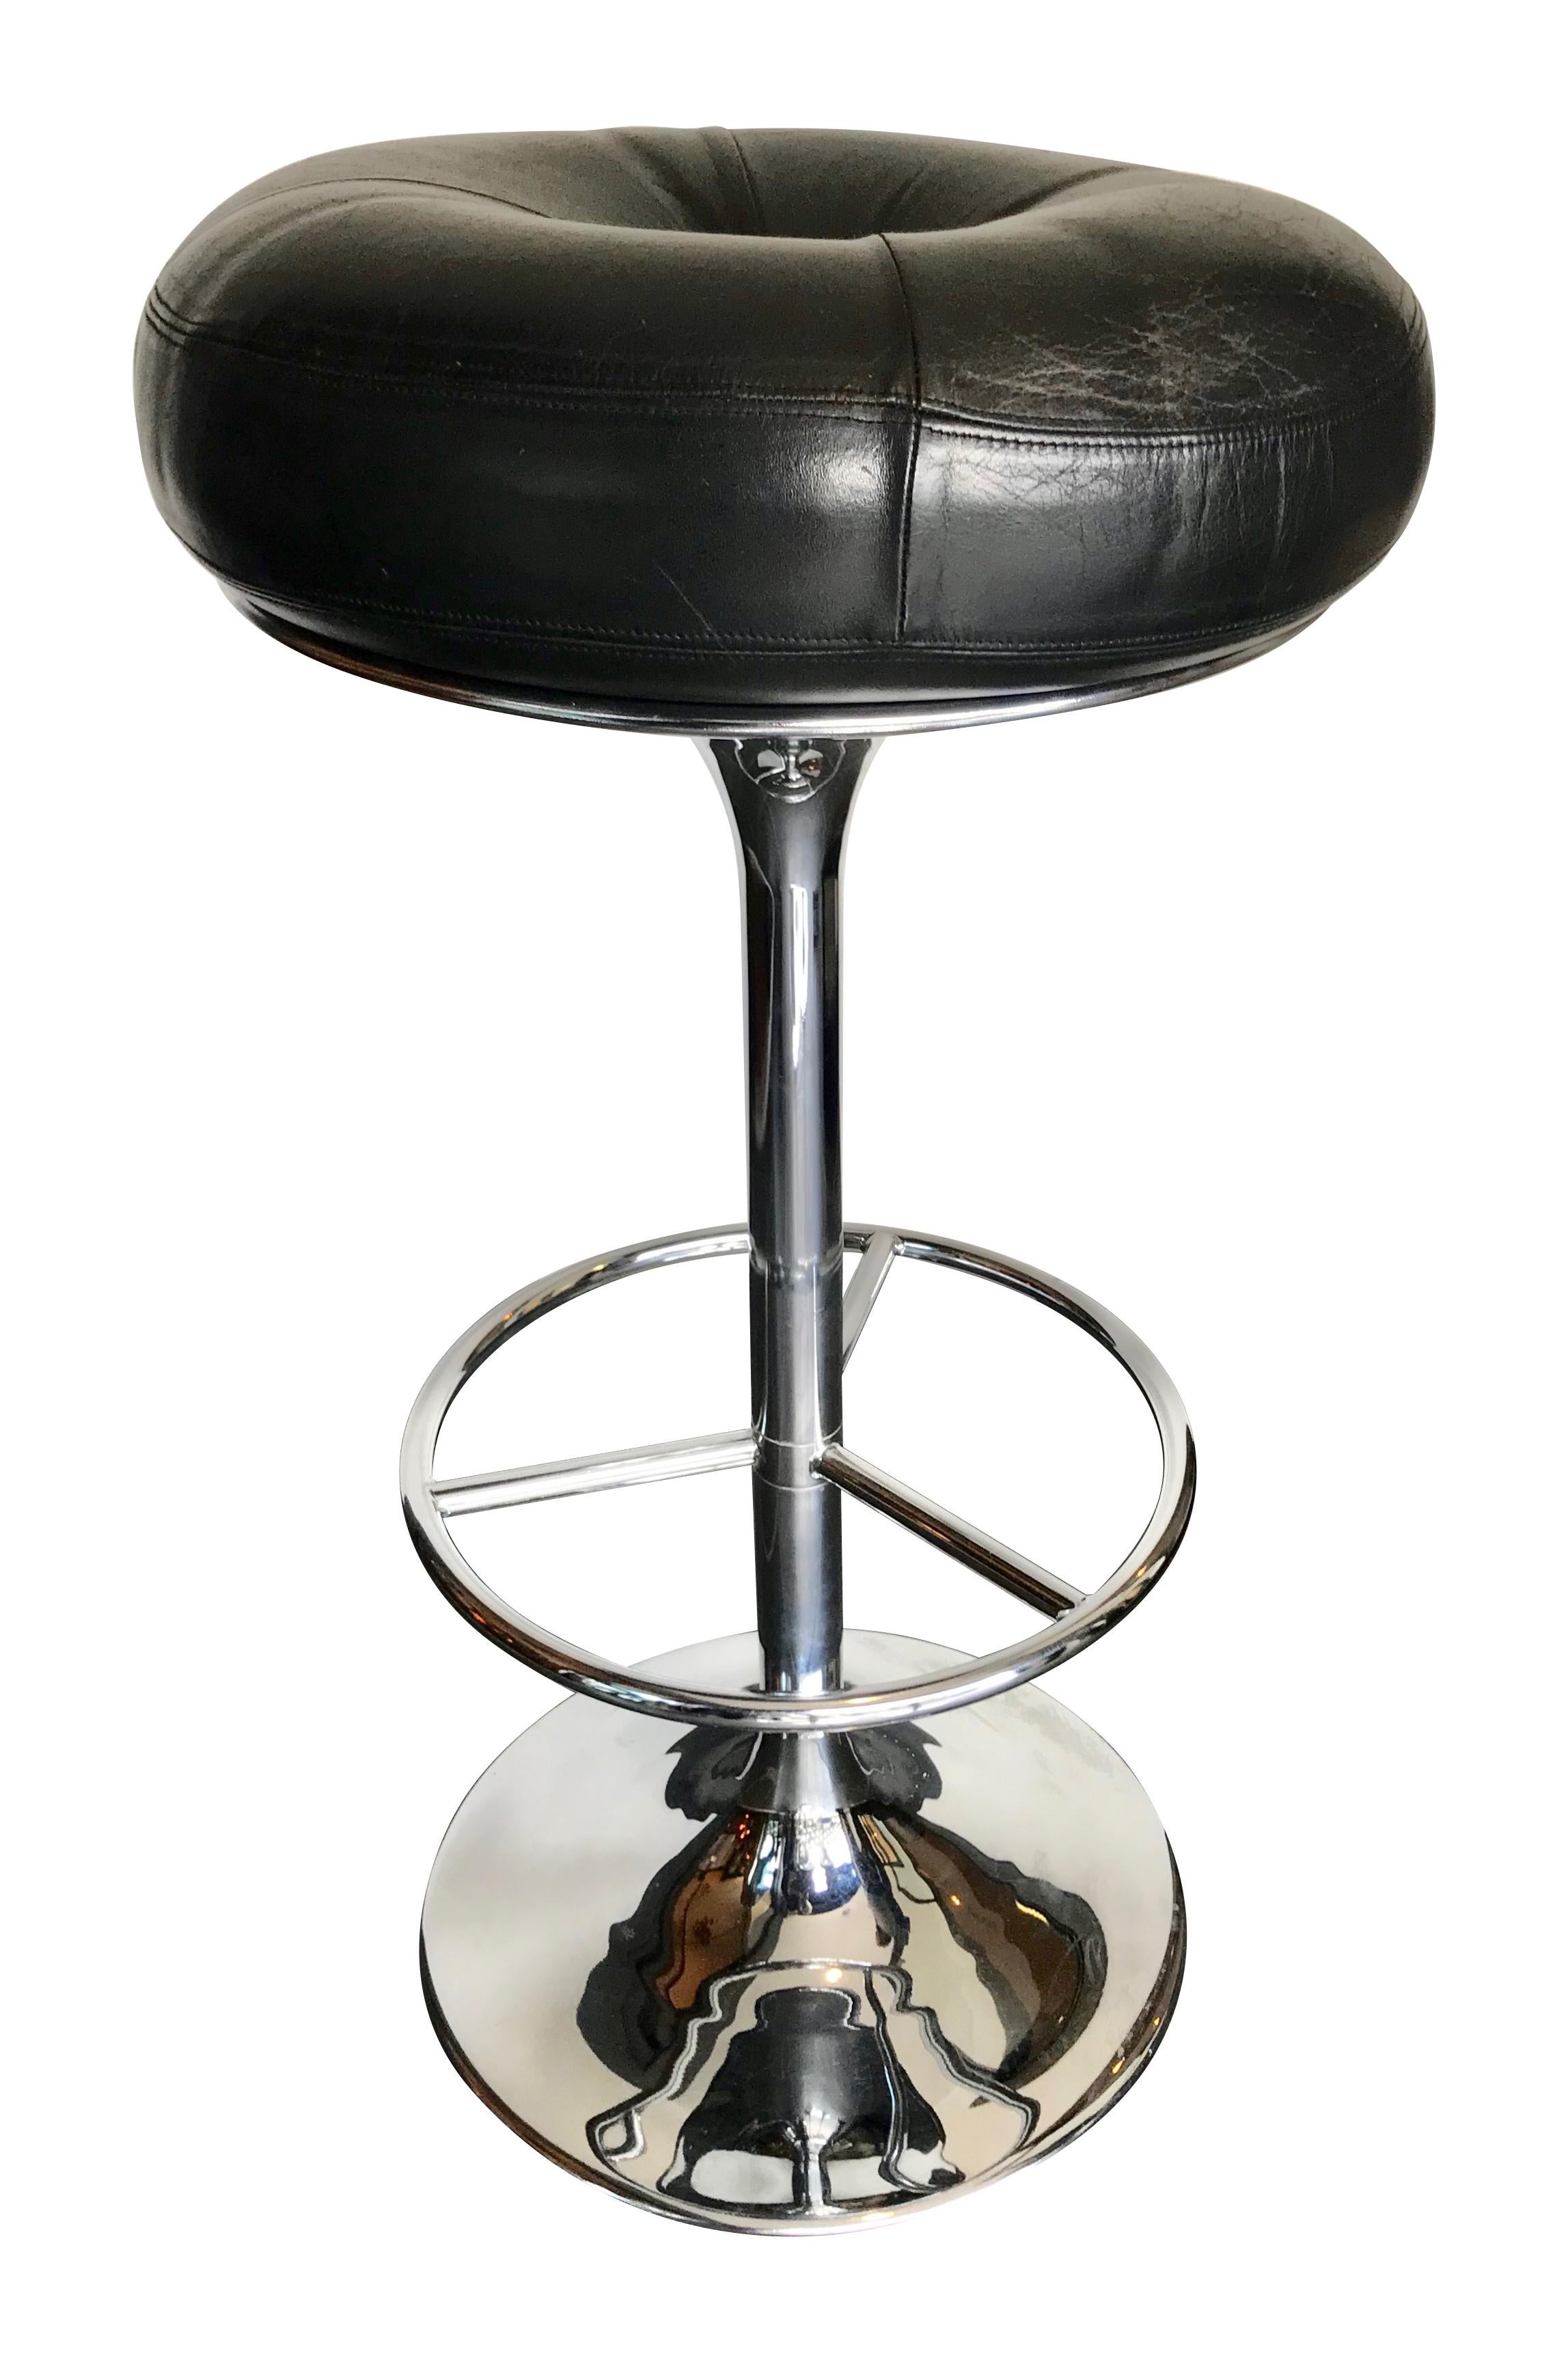 Set of 4 1970s Chrome and Black Leather Bar Stools by Johanson Design, Sweden 2